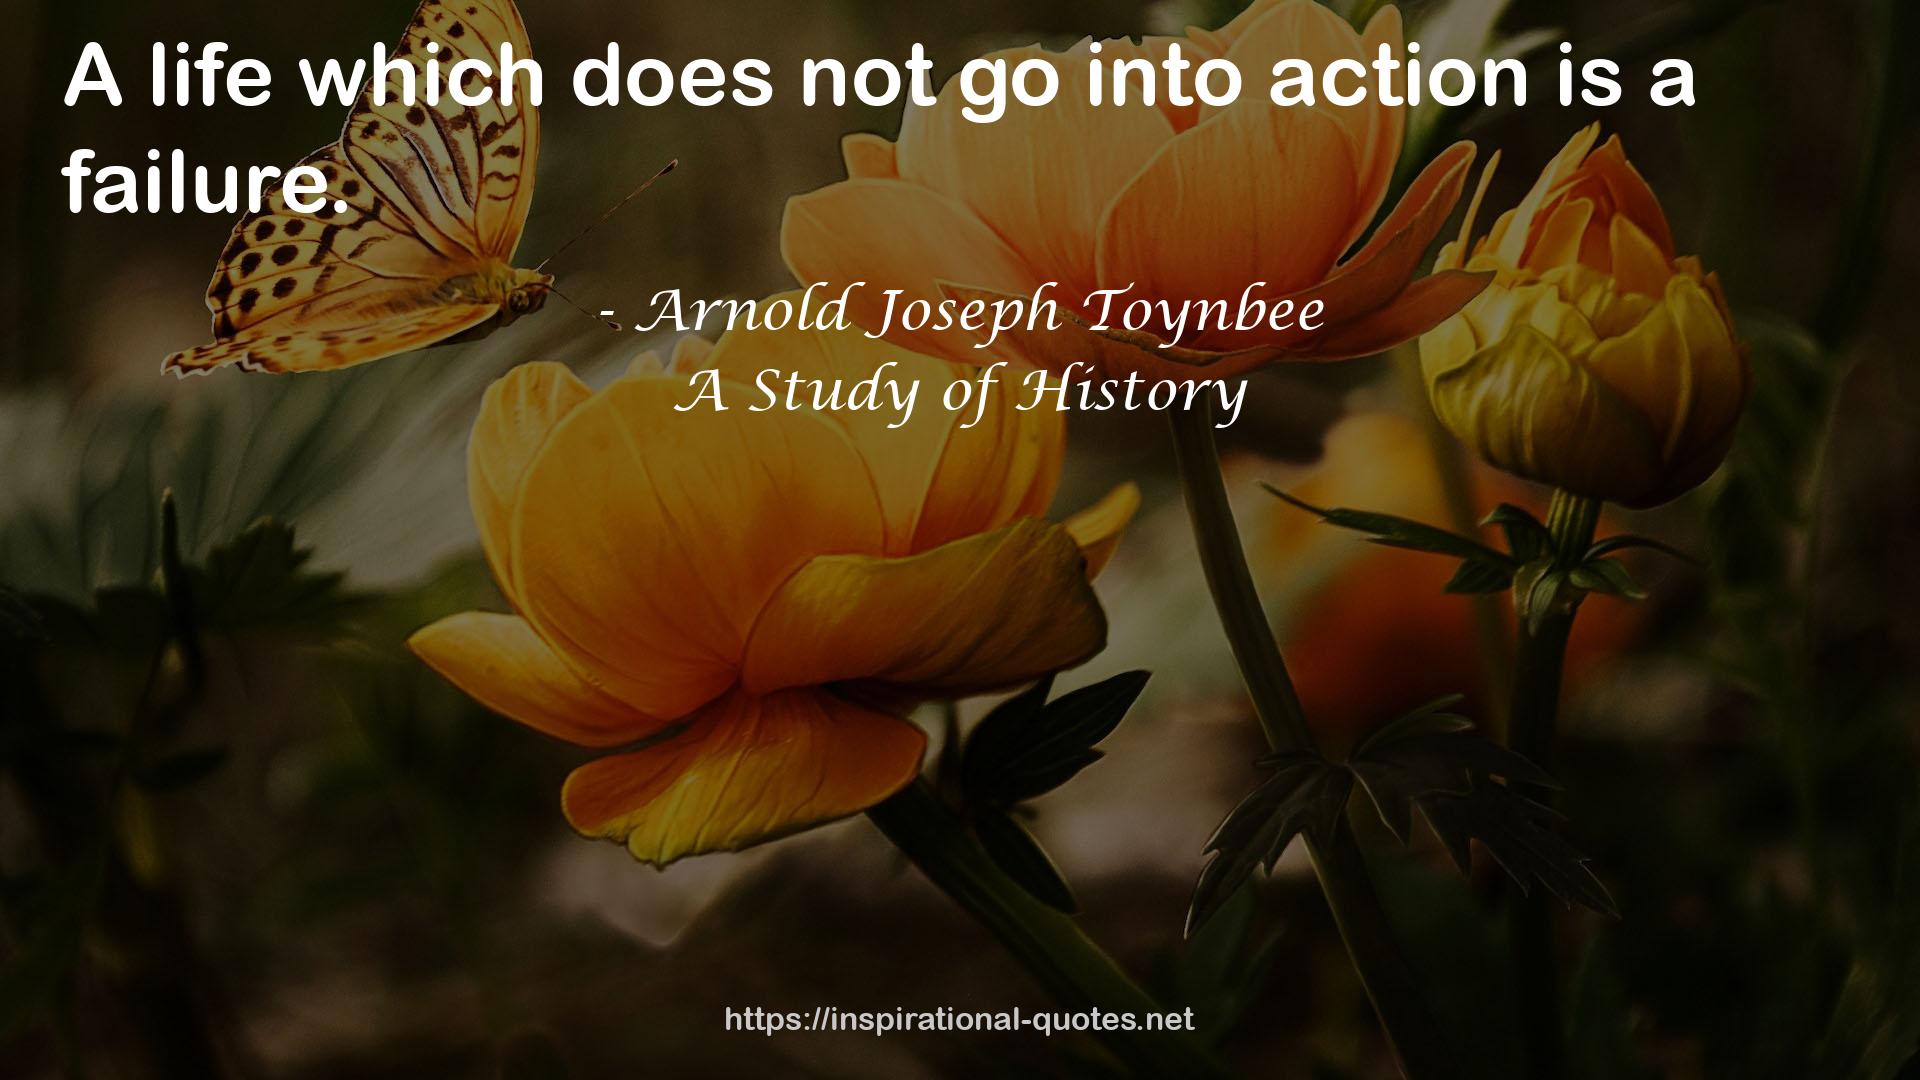 A Study of History QUOTES